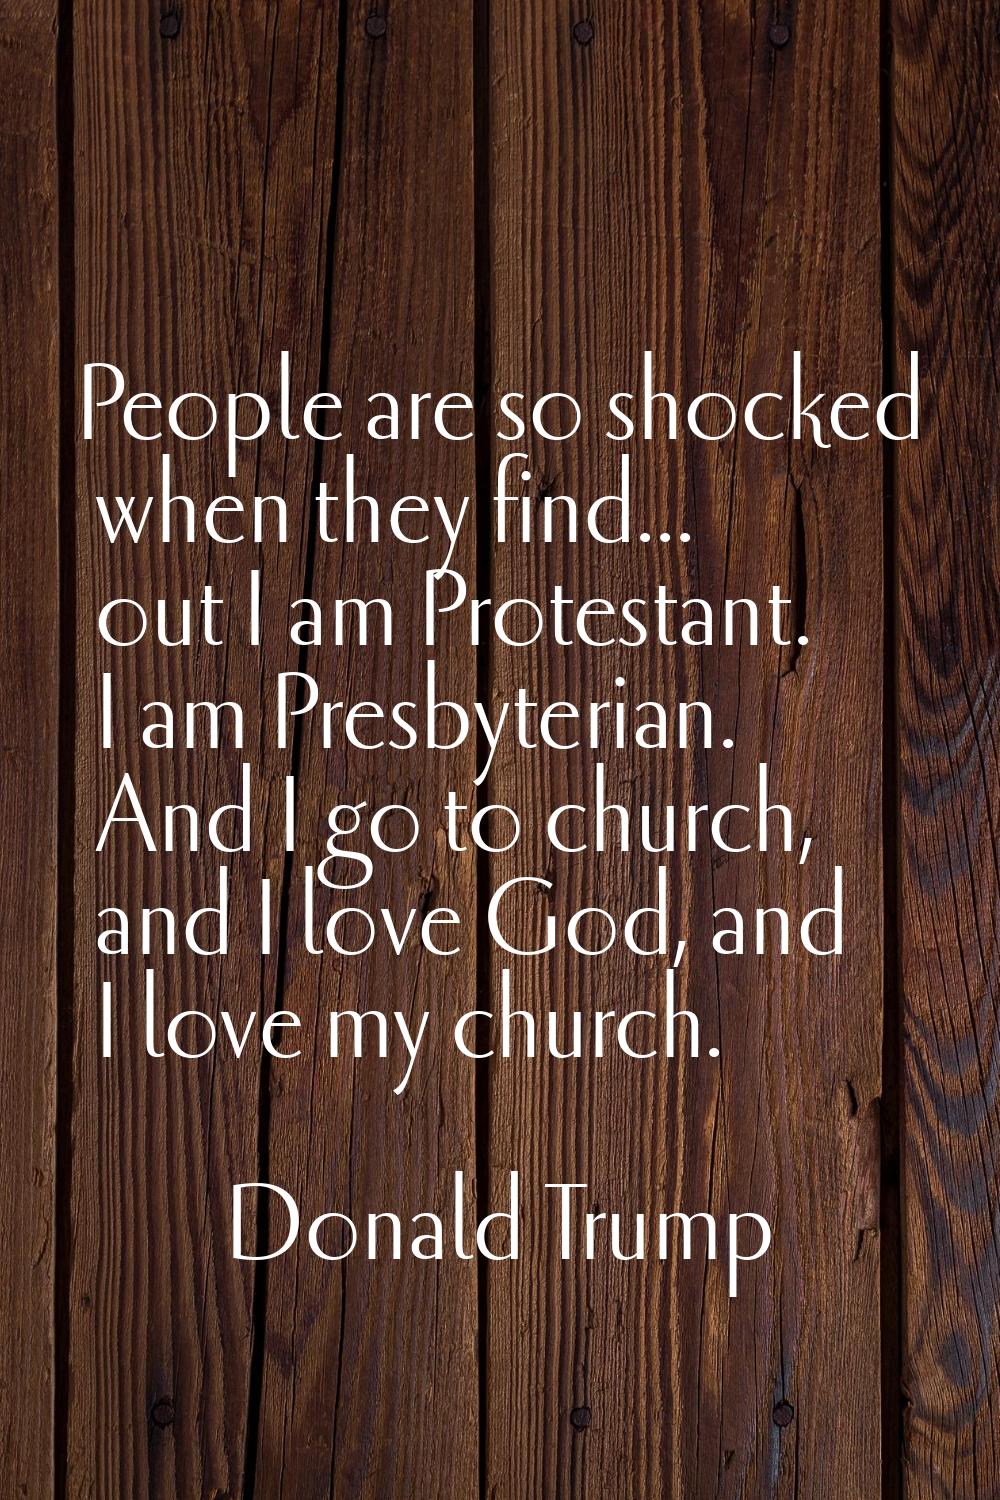 People are so shocked when they find... out I am Protestant. I am Presbyterian. And I go to church,